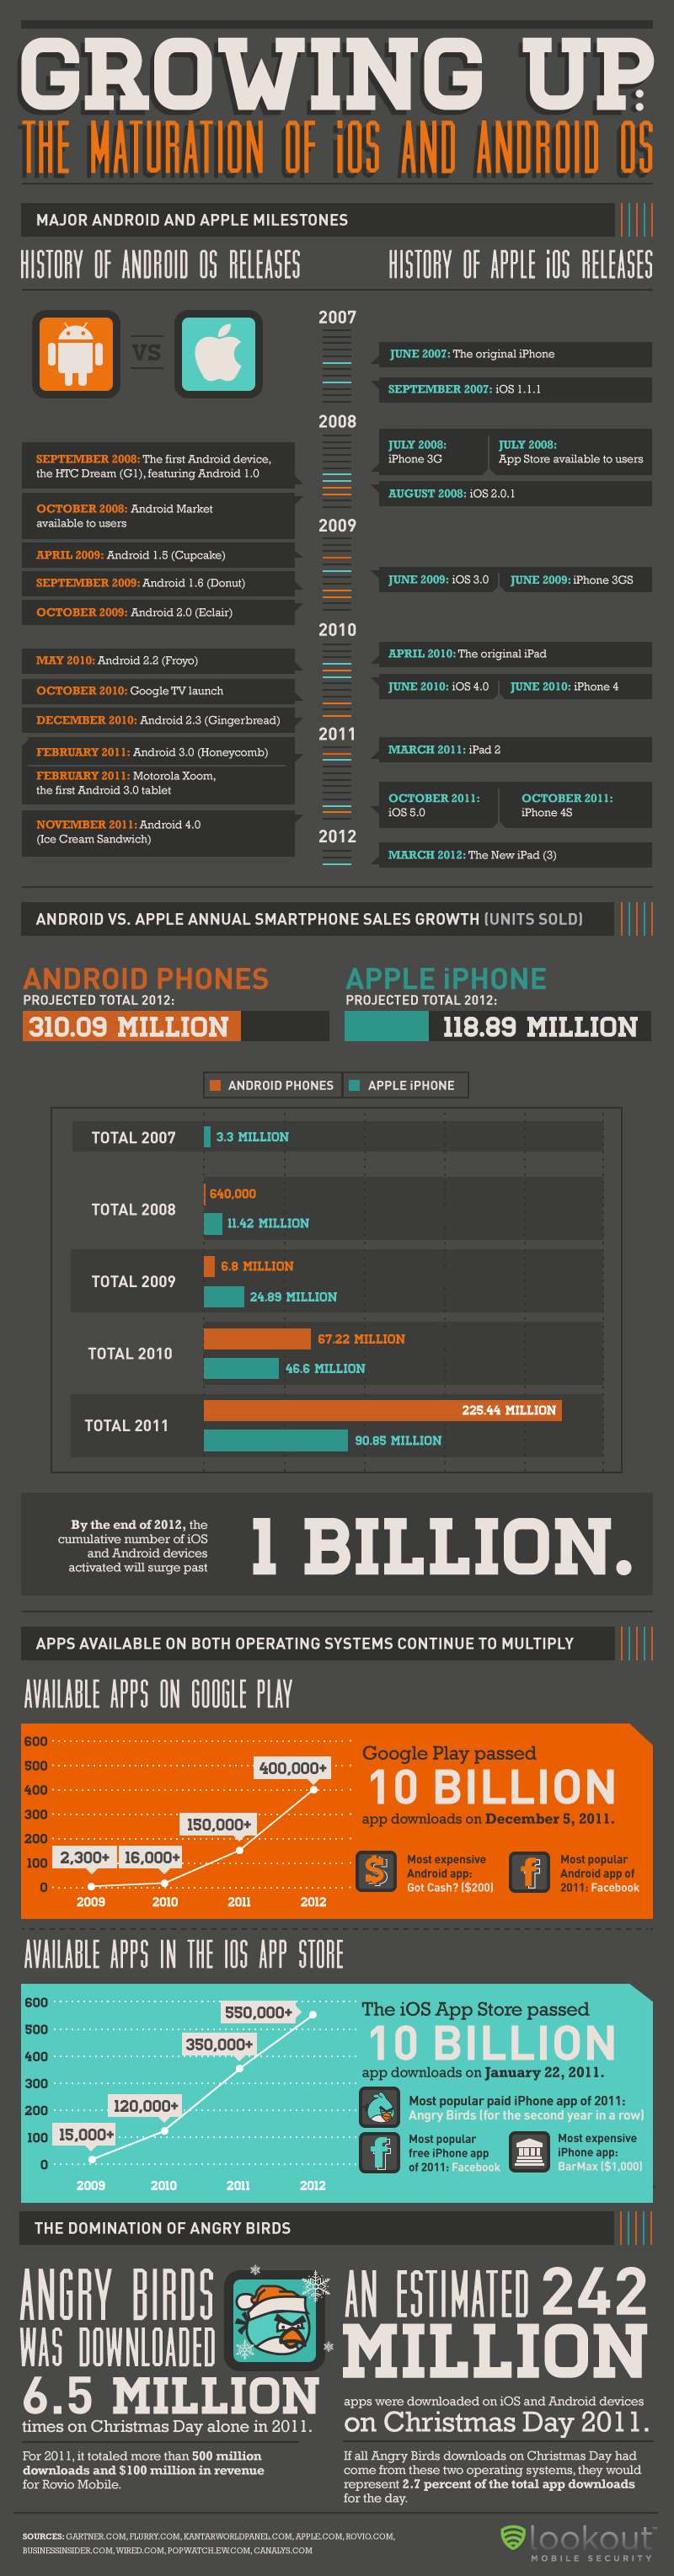 Growing Up: The Maturation of iOS and Android OS [Infographic]